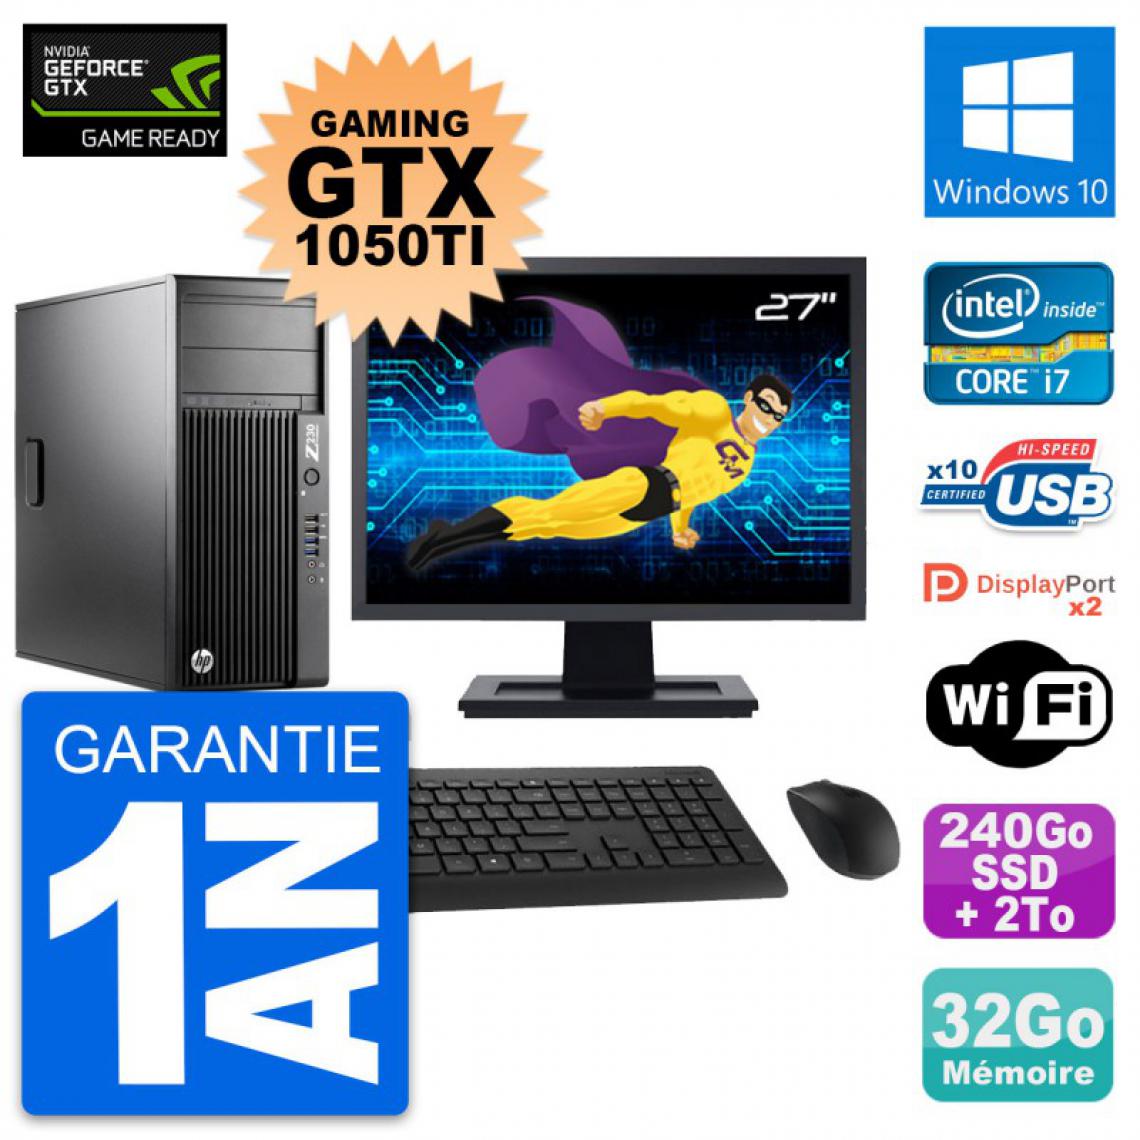 Hp - PC HP Z230 Ecran 27" Gaming GTX 1050Ti i7-4790 RAM 32Go 240Go SSD + 2To HDD W10 - PC Fixe